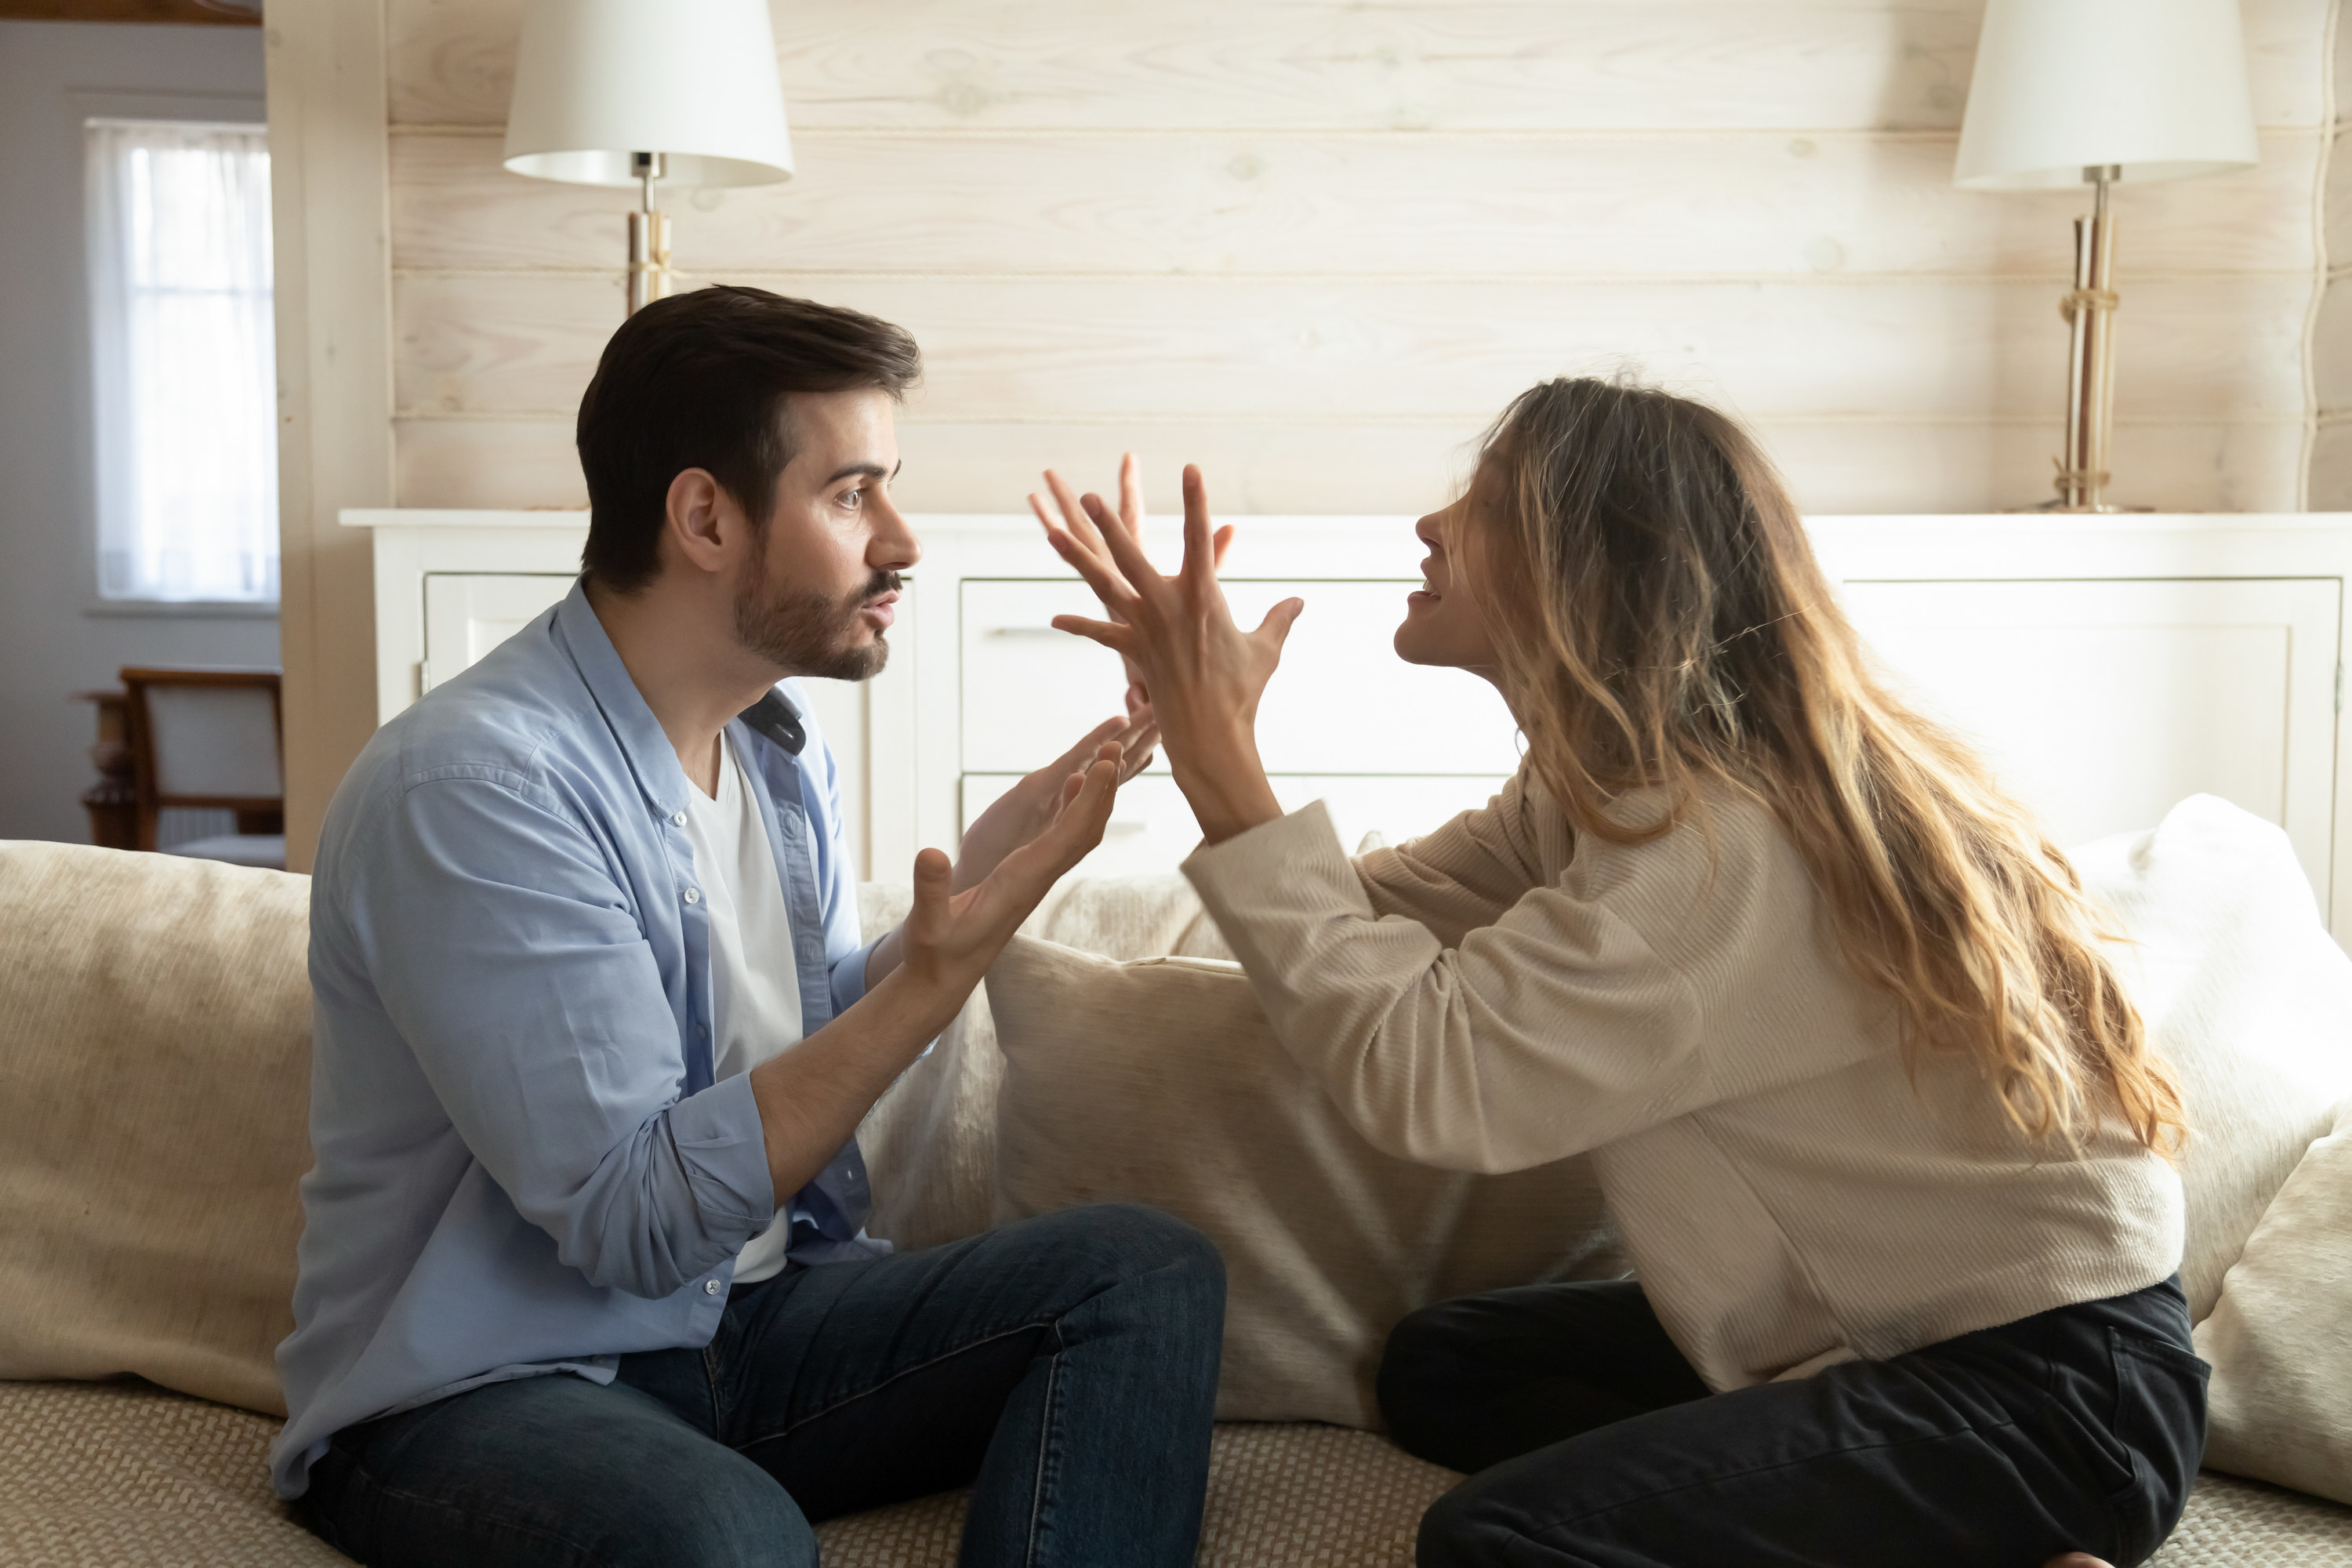 Emotional annoyed stressed couple sitting on couch, arguing at home. Angry irritated nervous woman man shouting at each other, figuring out relations, feeling outraged, relationship problems concept